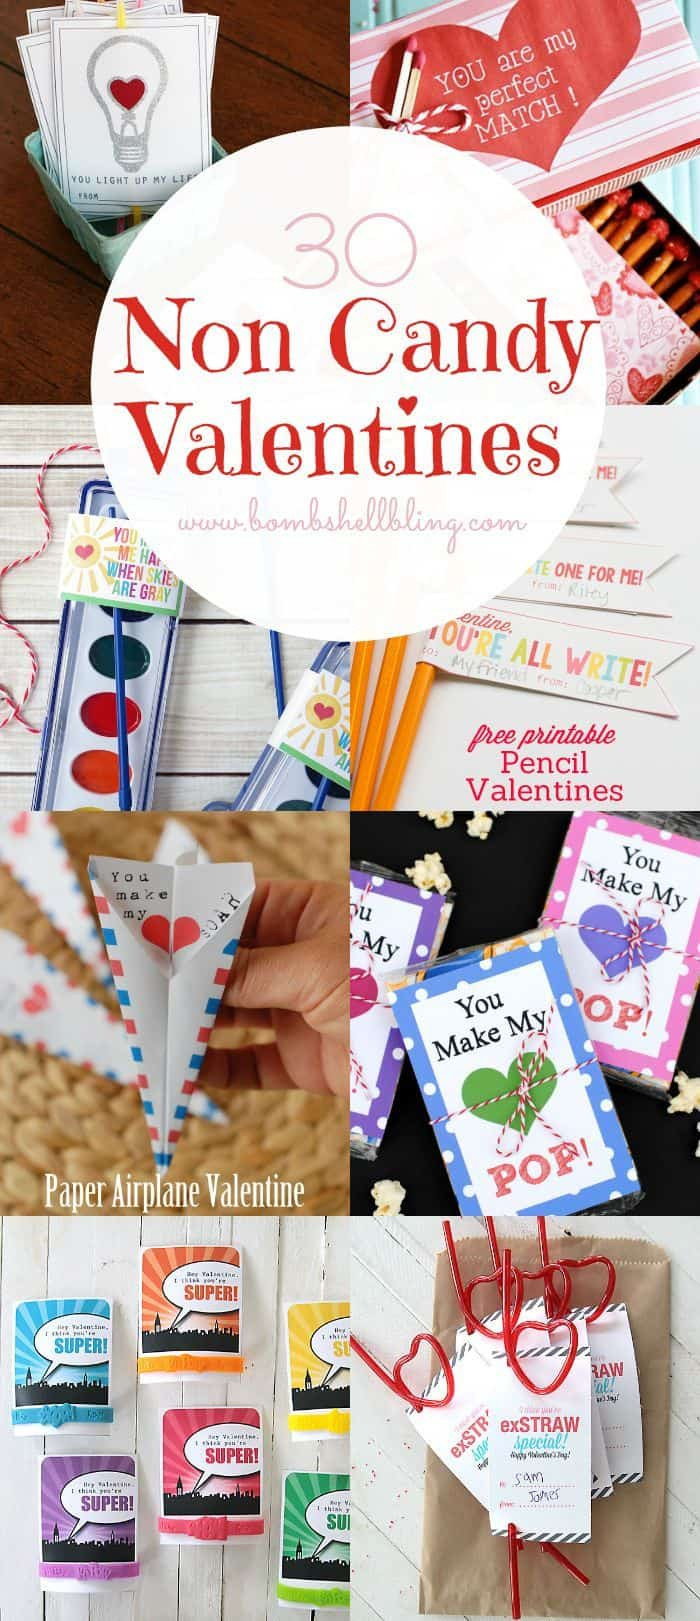 Valentines Gifts Kids
 Non Candy Valentine s Day Gift Ideas for Kids